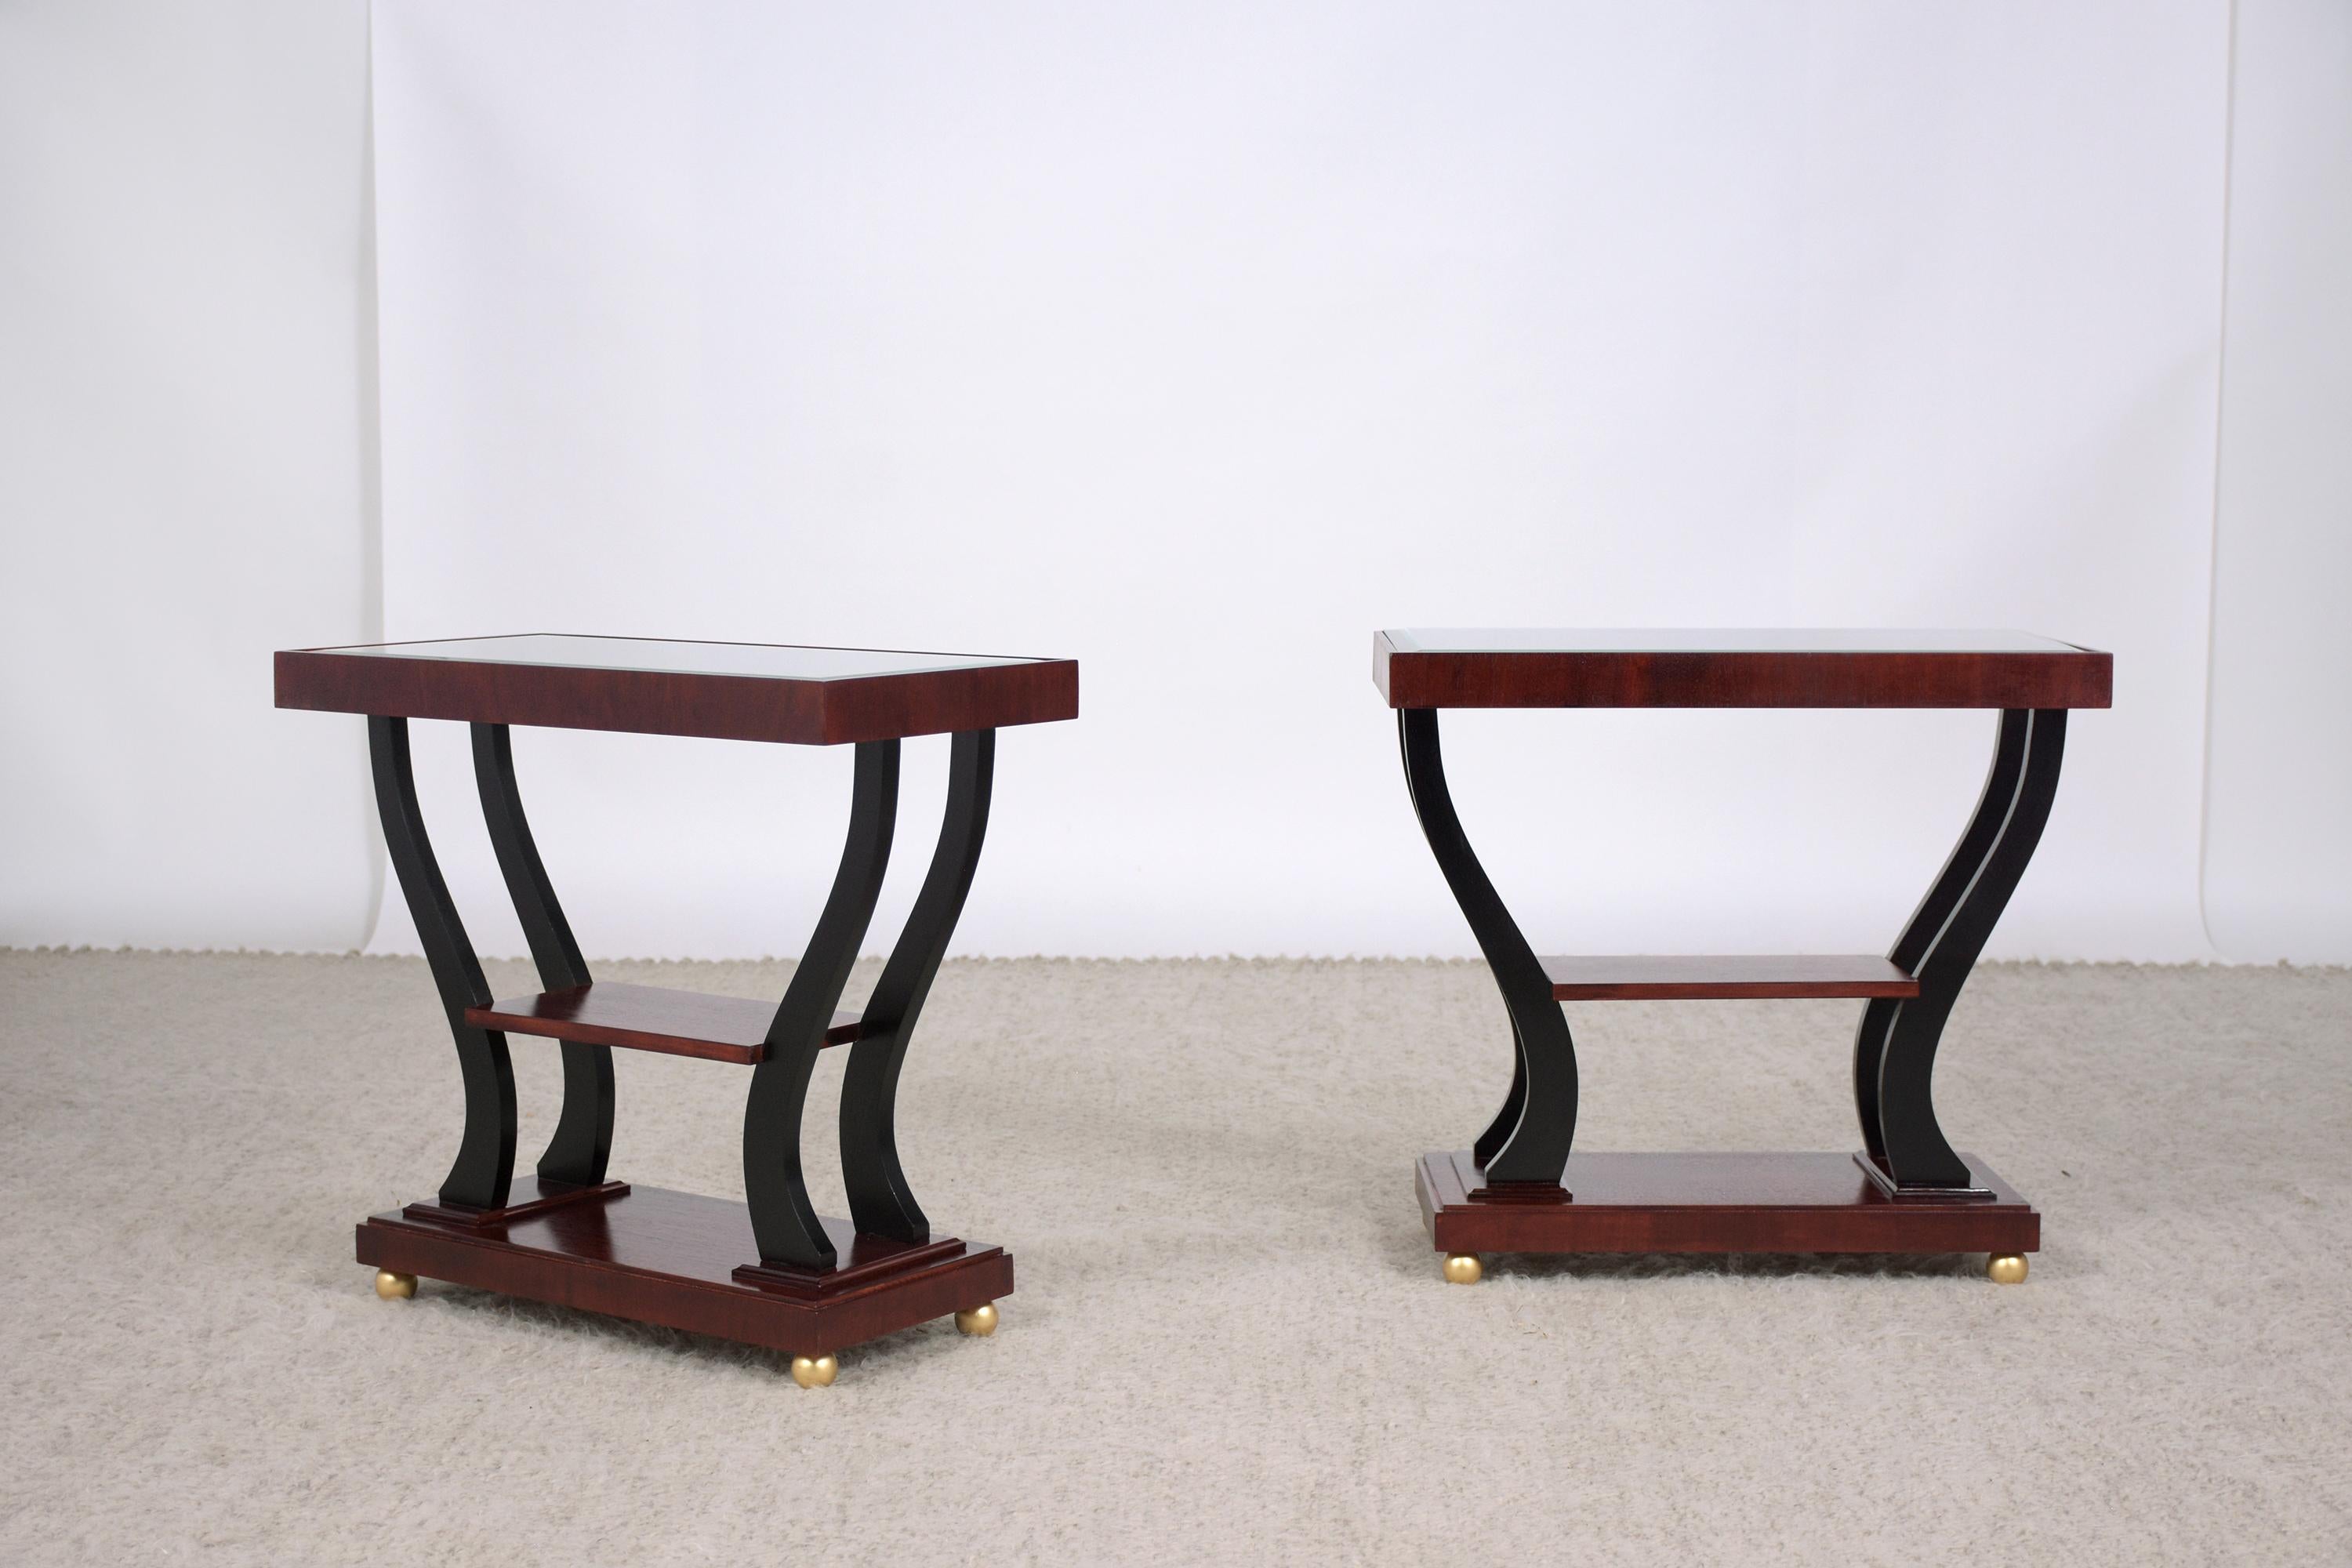 An extraordinary pair of 1950s art deco side tables in great condition hand-crafted out of walnut and completely restored by our craftsmen team. These fabulous pieces feature a rich walnut and ebonized color accents with lacquered finish, two tiers